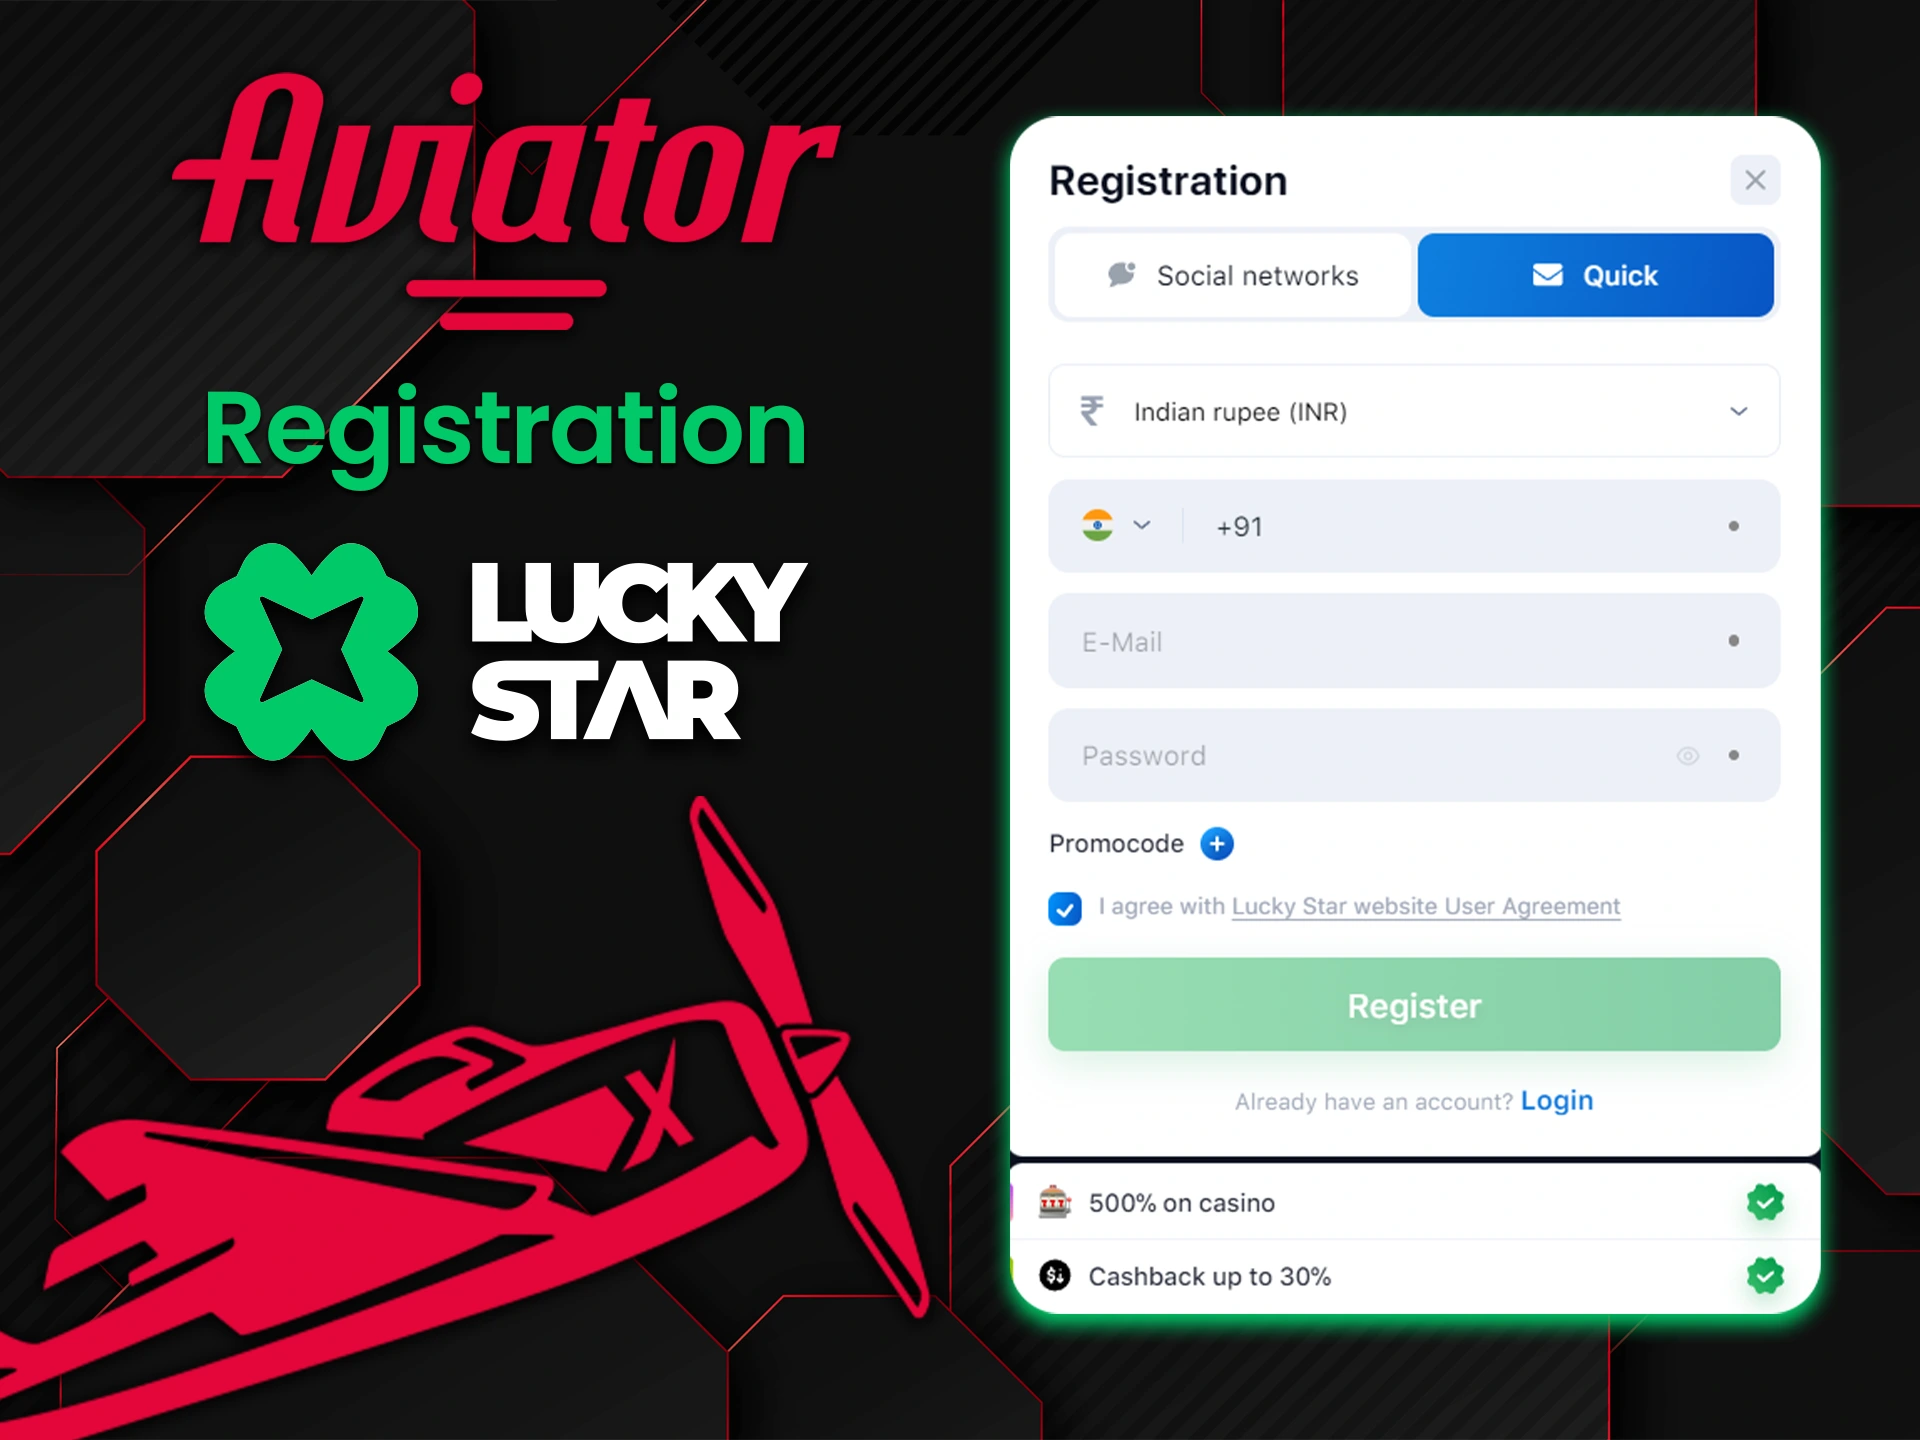 Before you start playing Aviator register an account with Lucky Star.